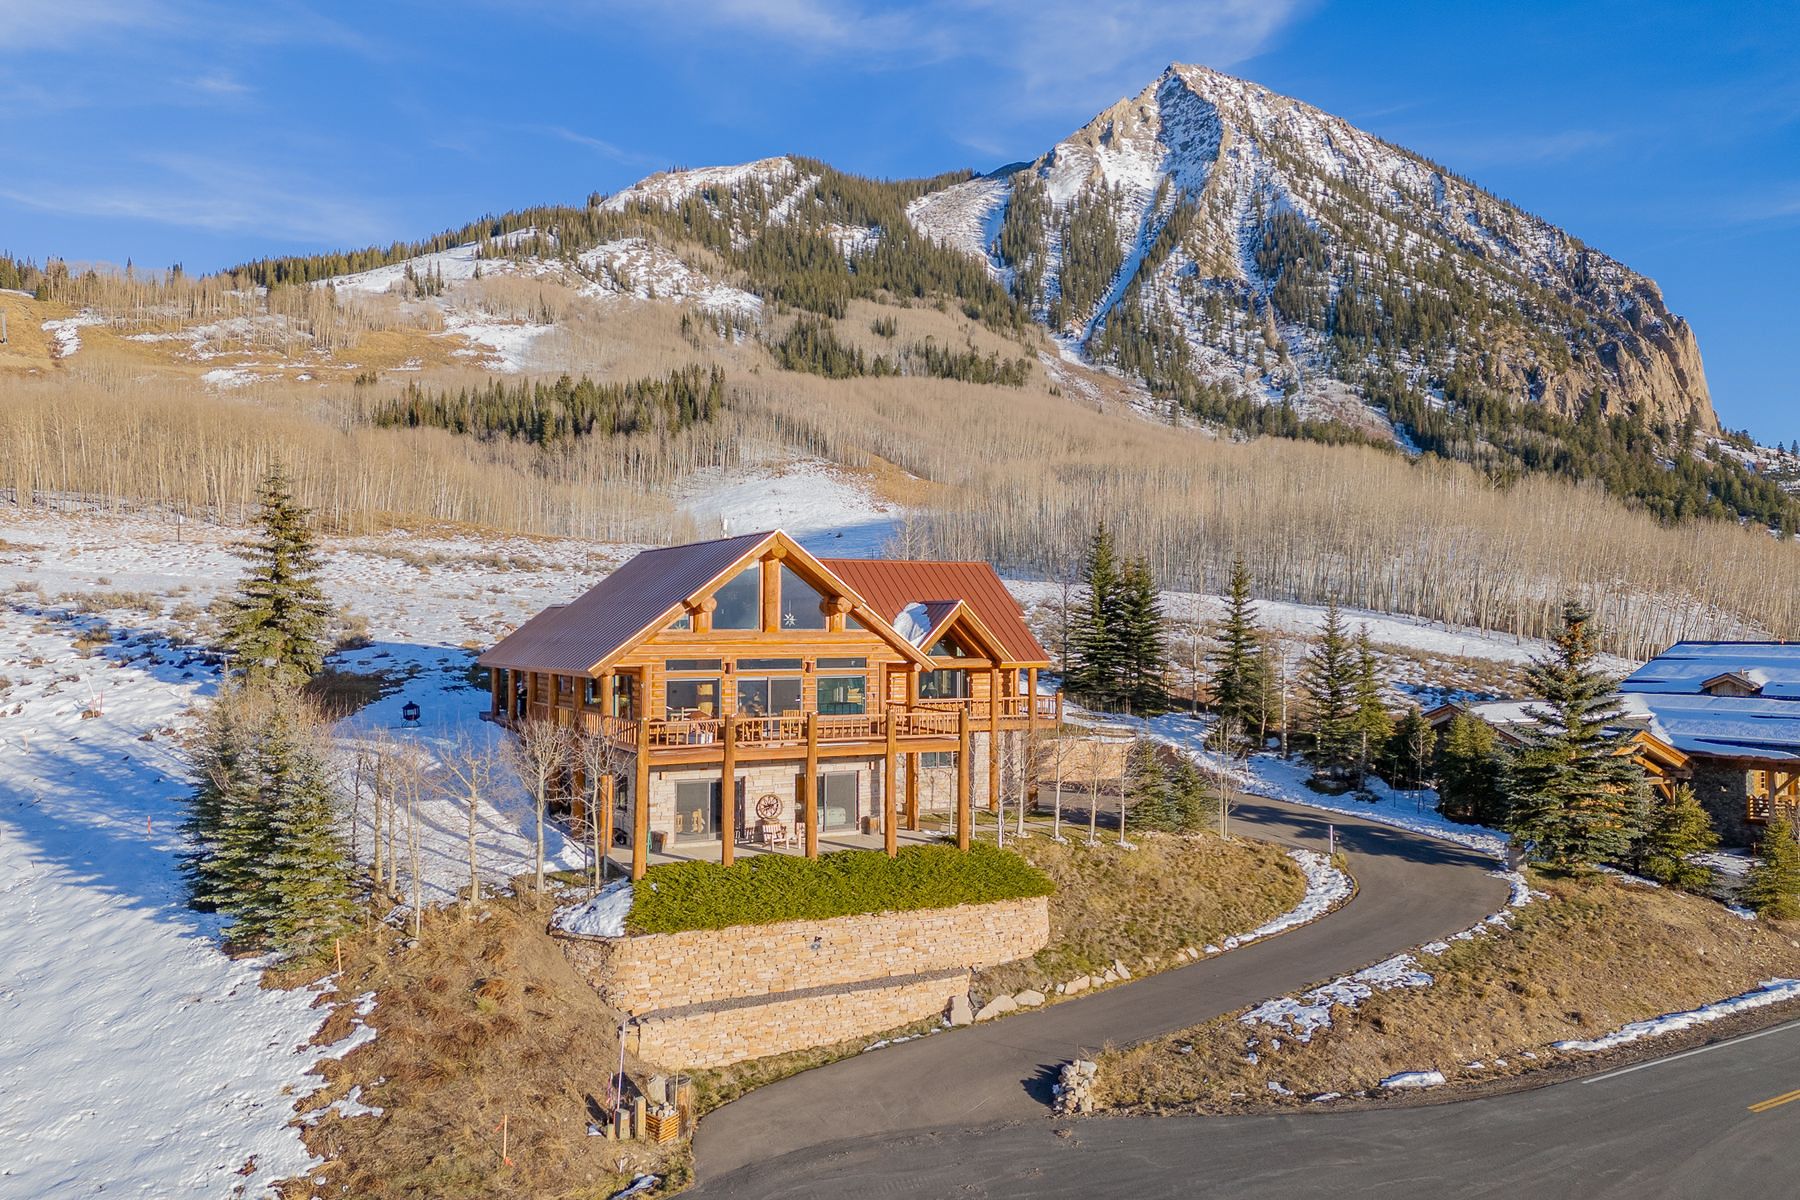 56 Summit Road, Mt. Crested Butte, CO